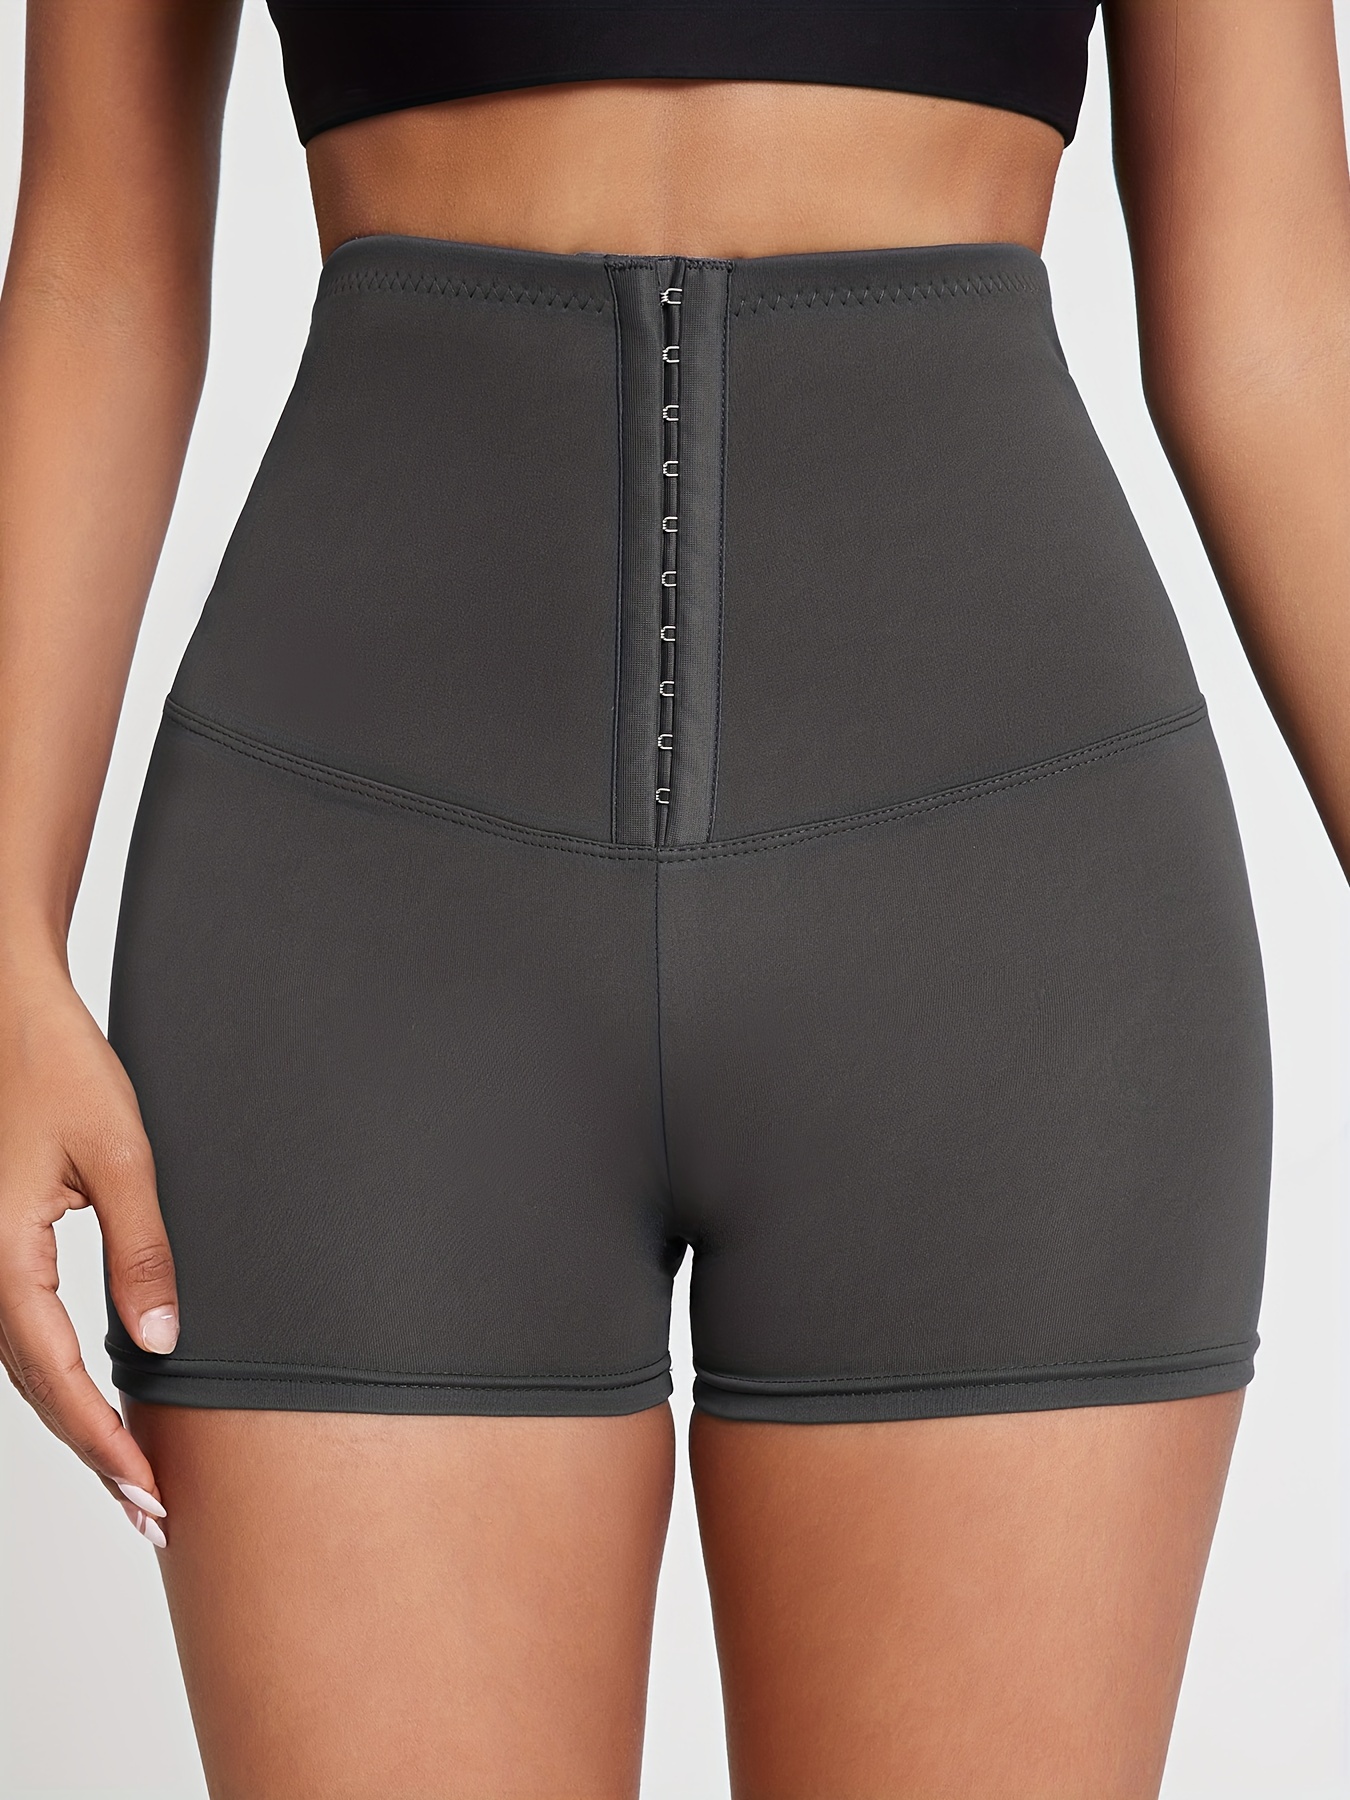 Slim Fit Casual Shorts for Women Under Dress Tummy Control